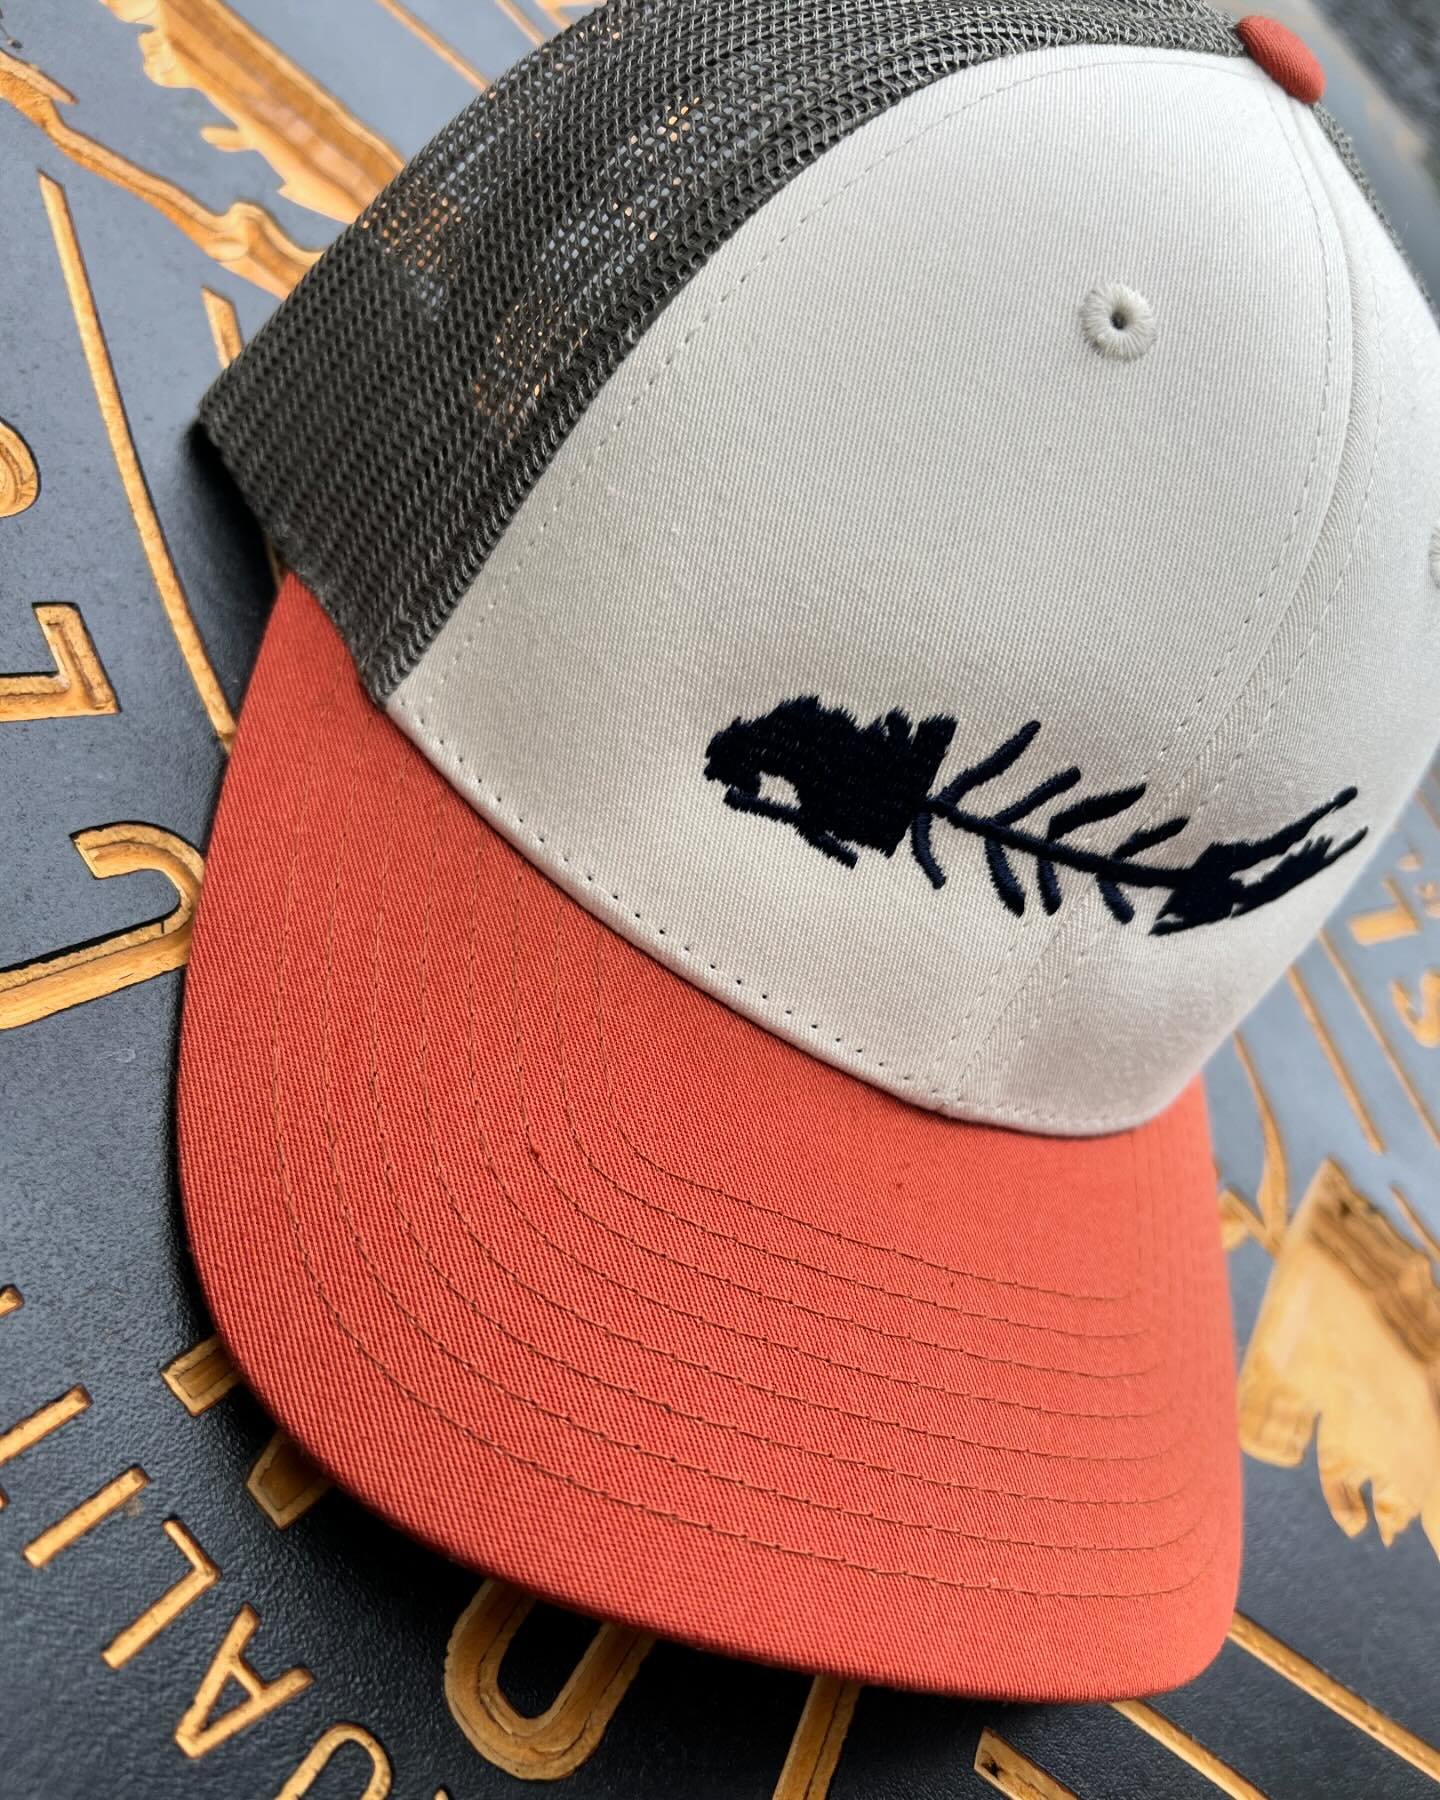 Restock and a few new LI Fish mesh hats available online. Carletonclothing.com